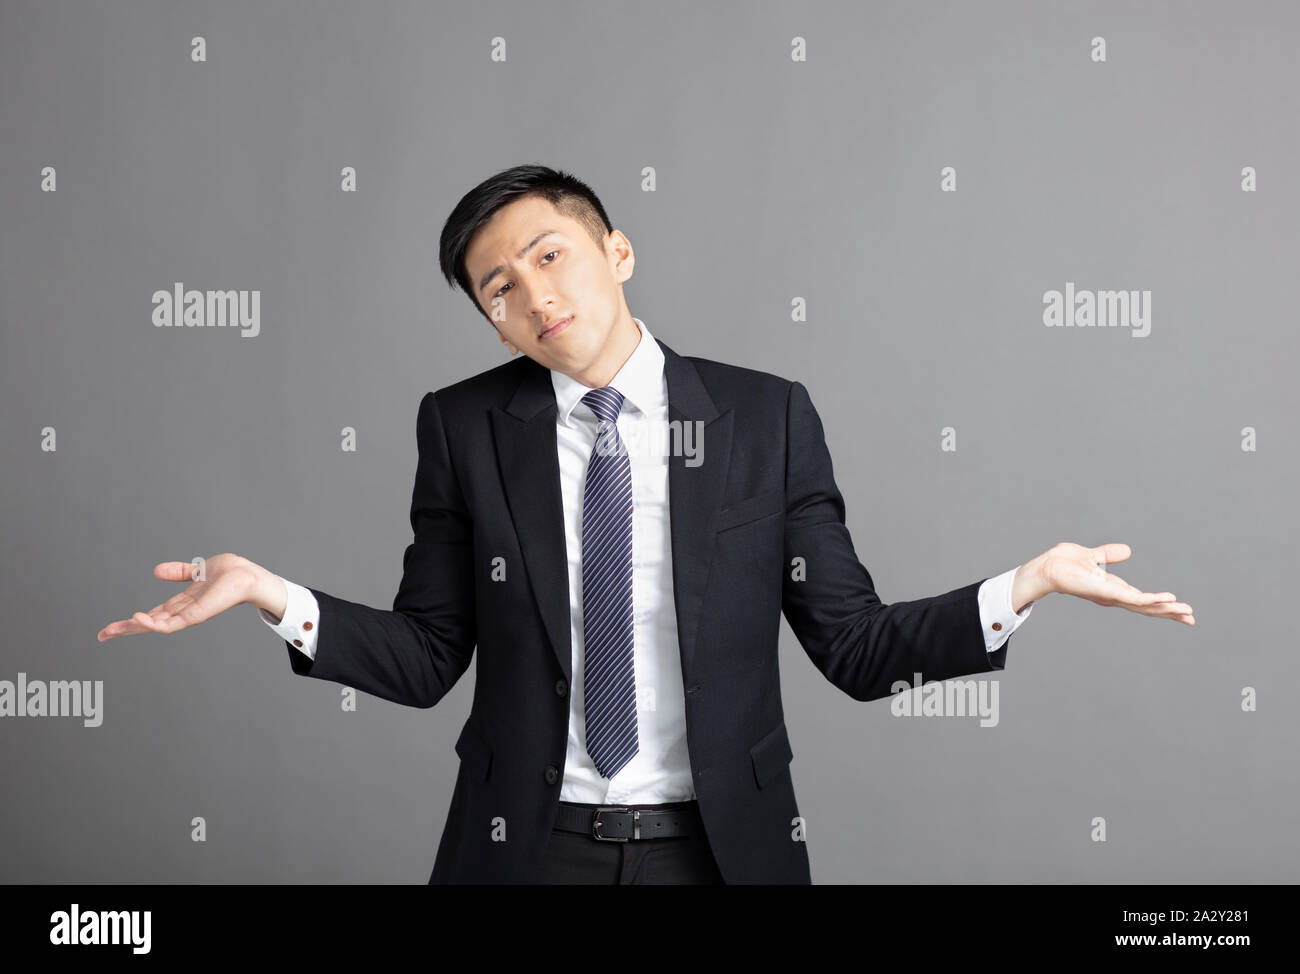 confused young businessman shrugging shoulders Stock Photo